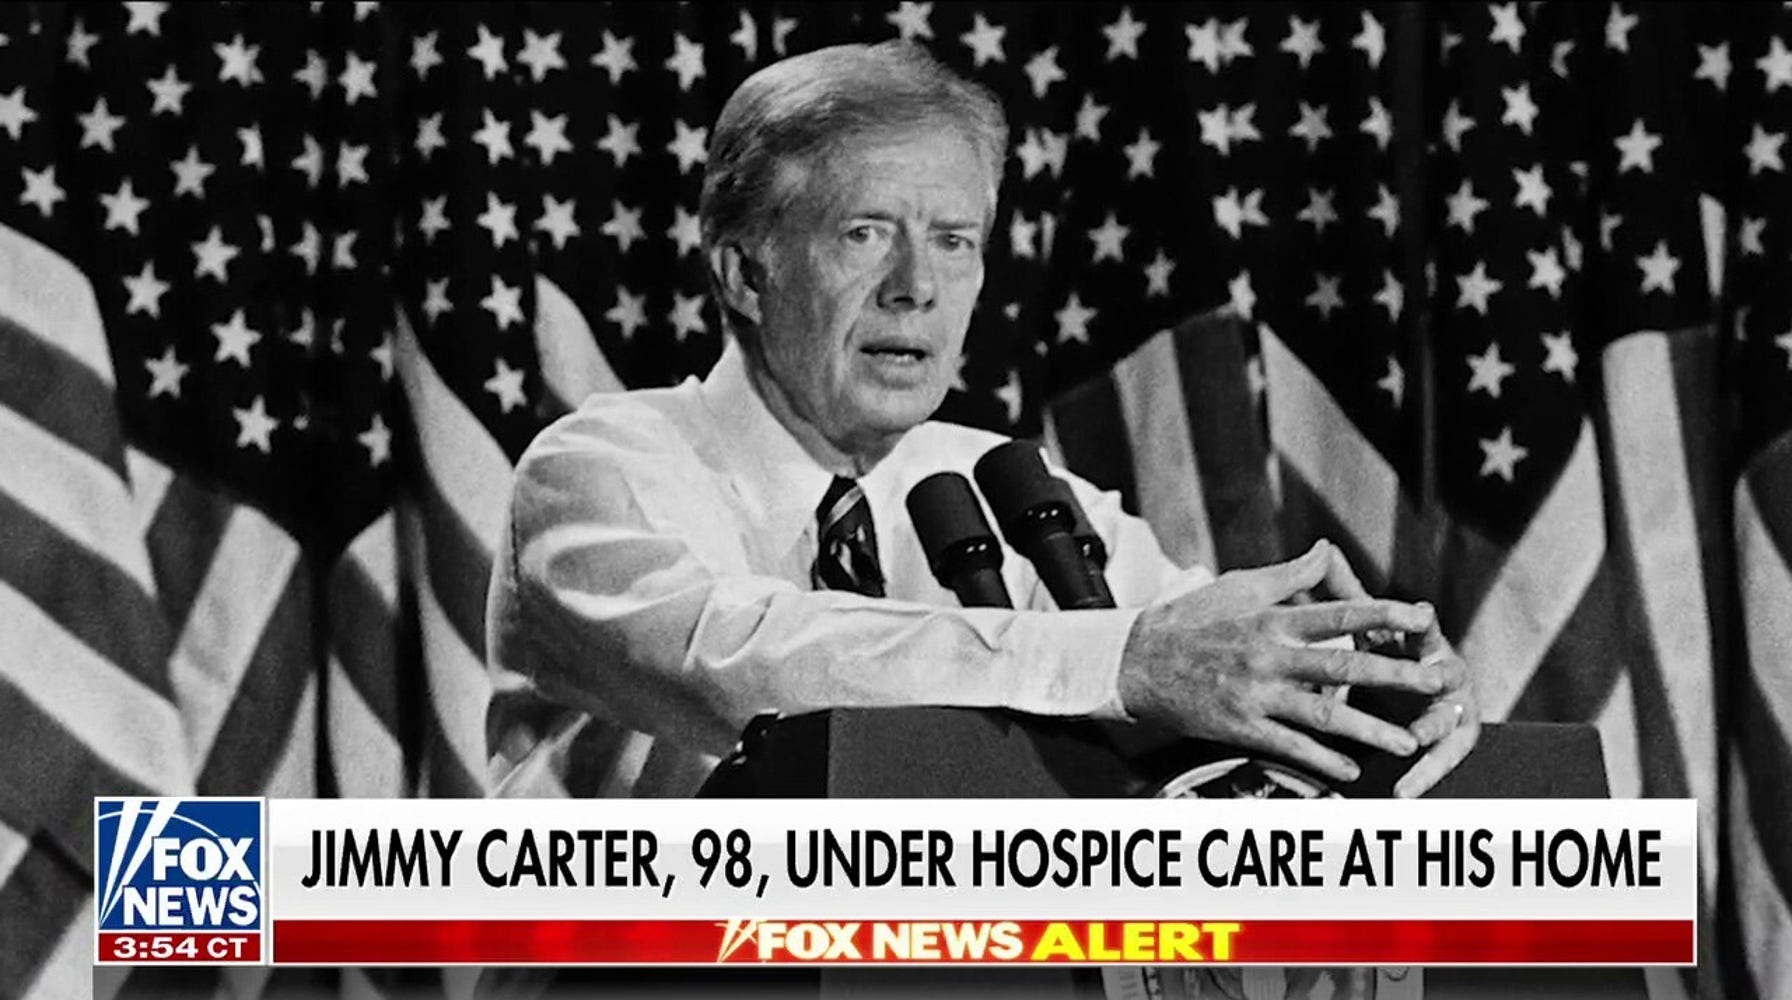 President Jimmy Carter, 98, enters hospice care at home